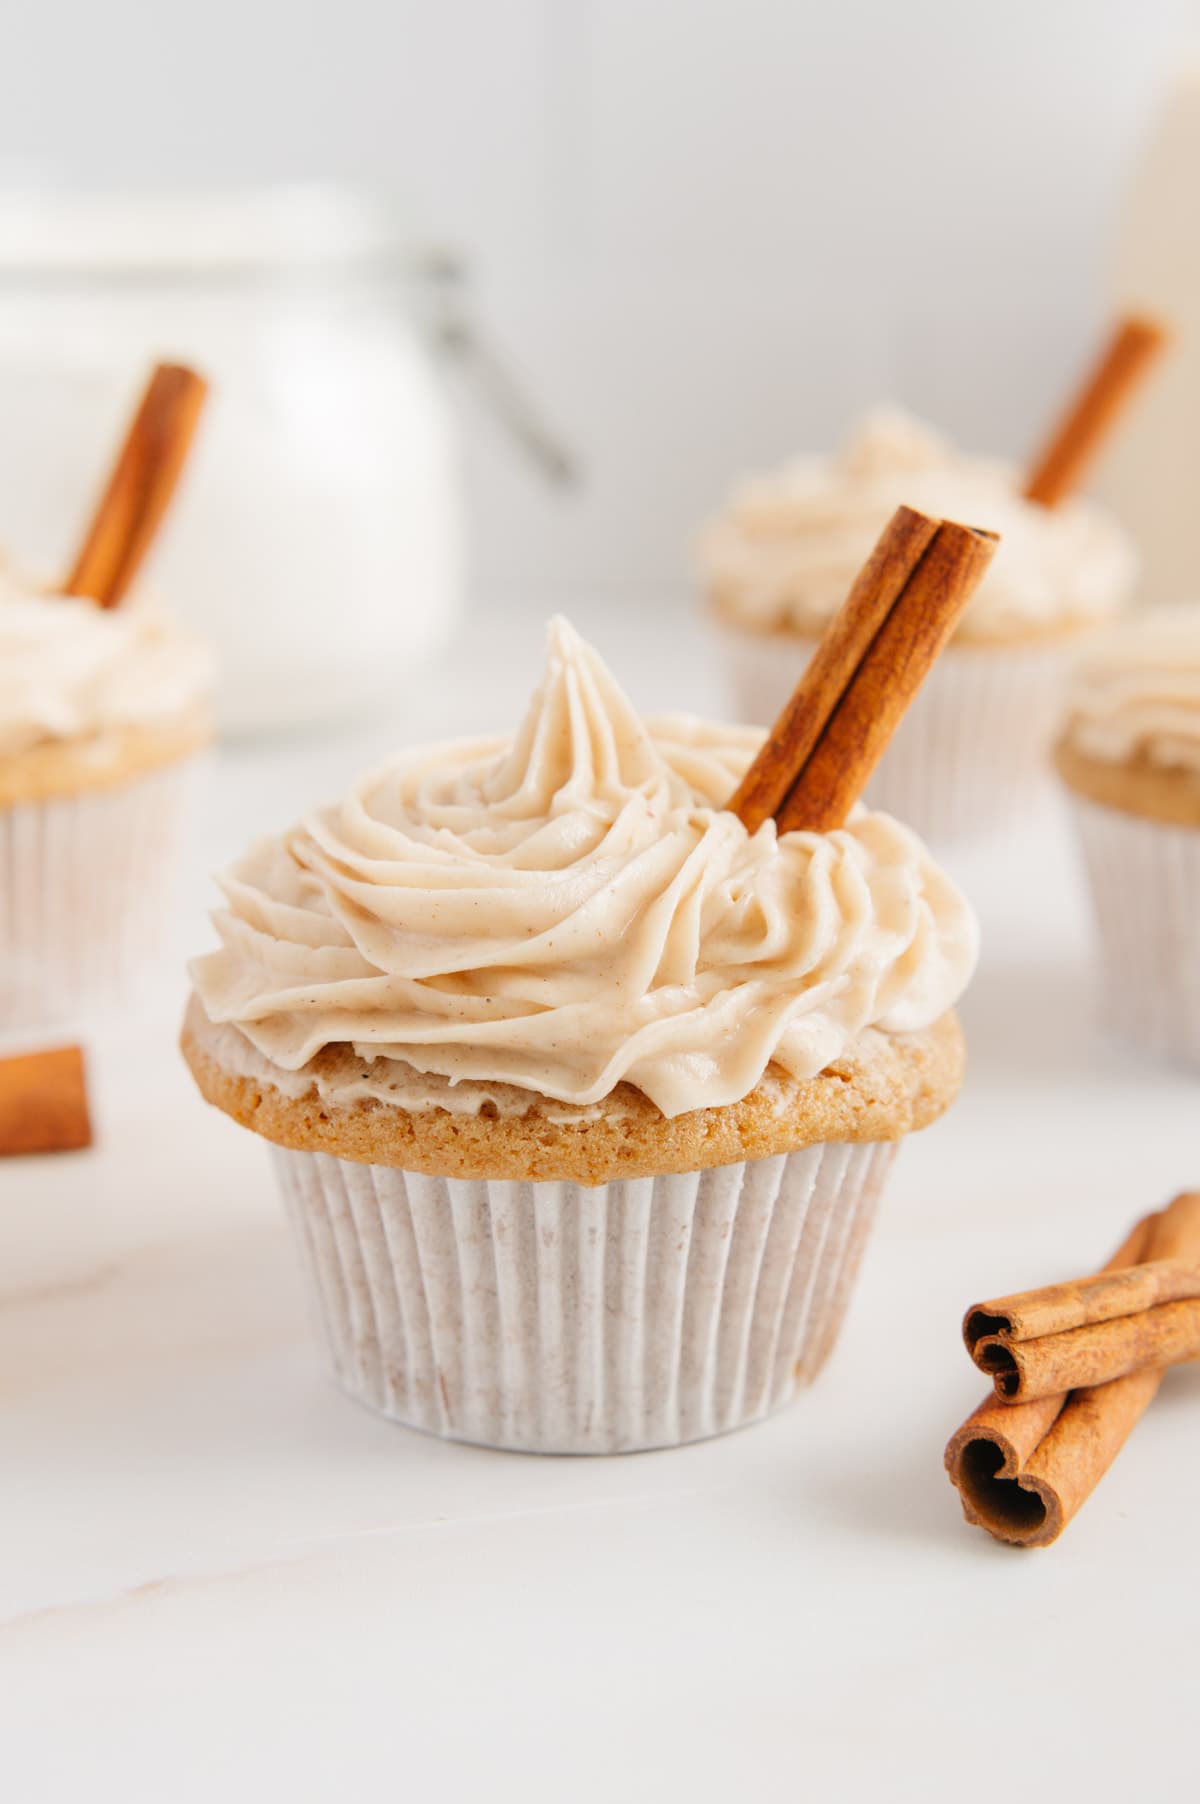 Upclose of a chai cupcake with frosting.